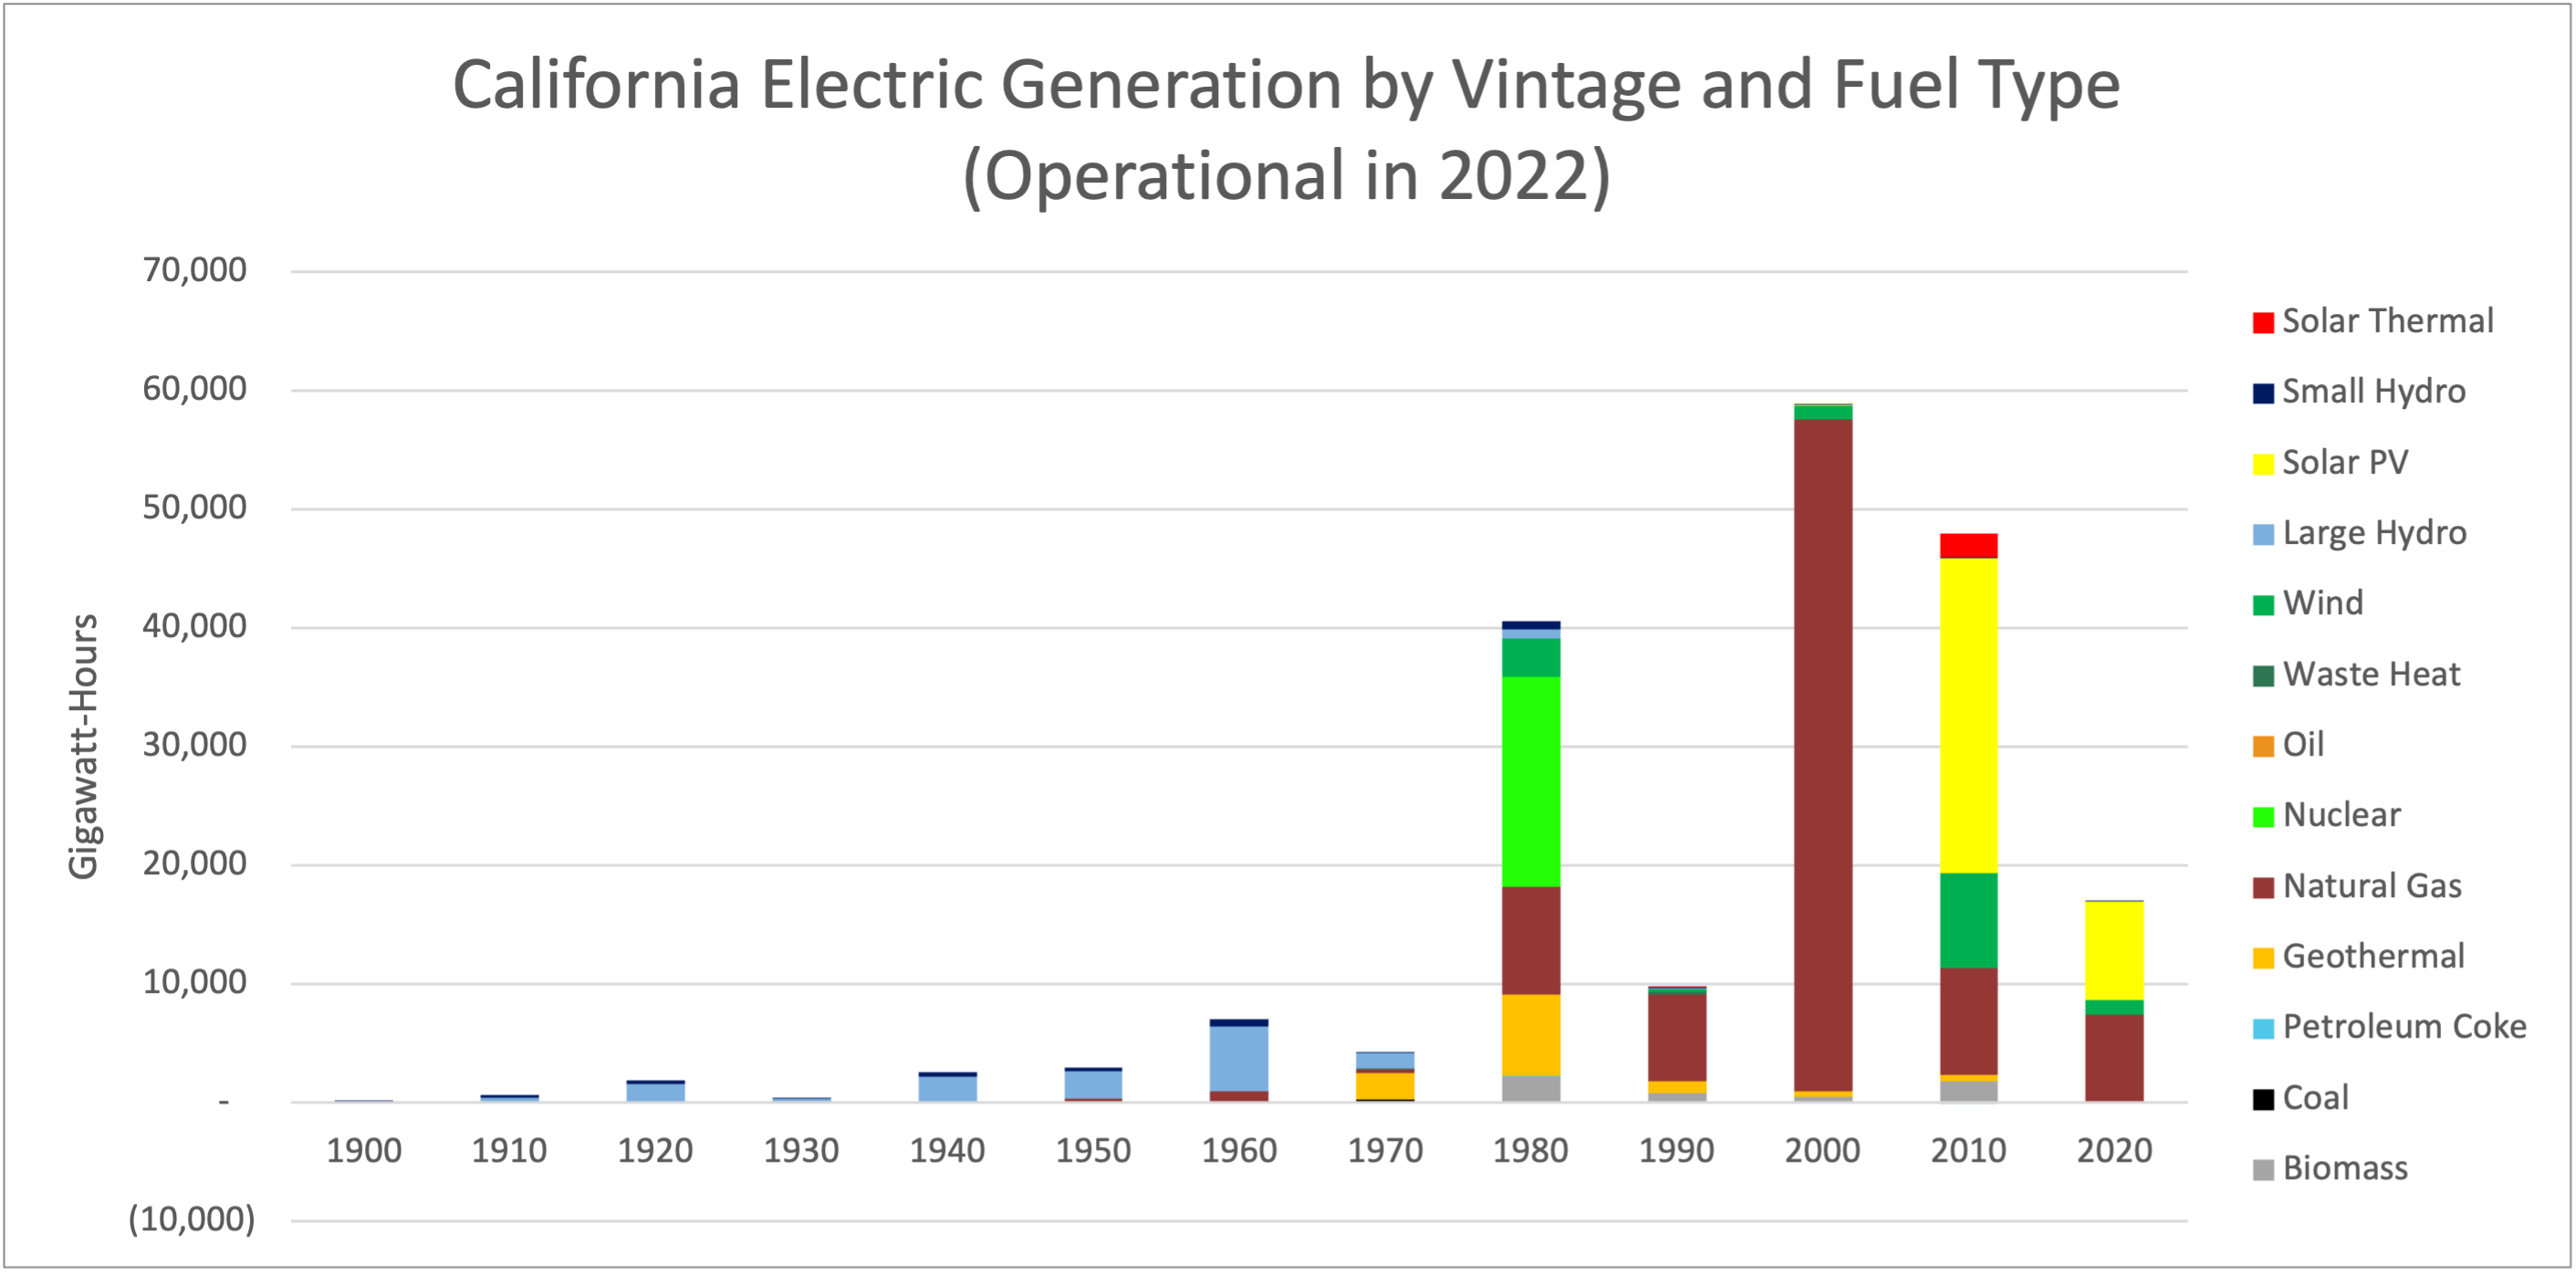 California Electric Generation by Vintage and Fuel Type (Operational in 2020)